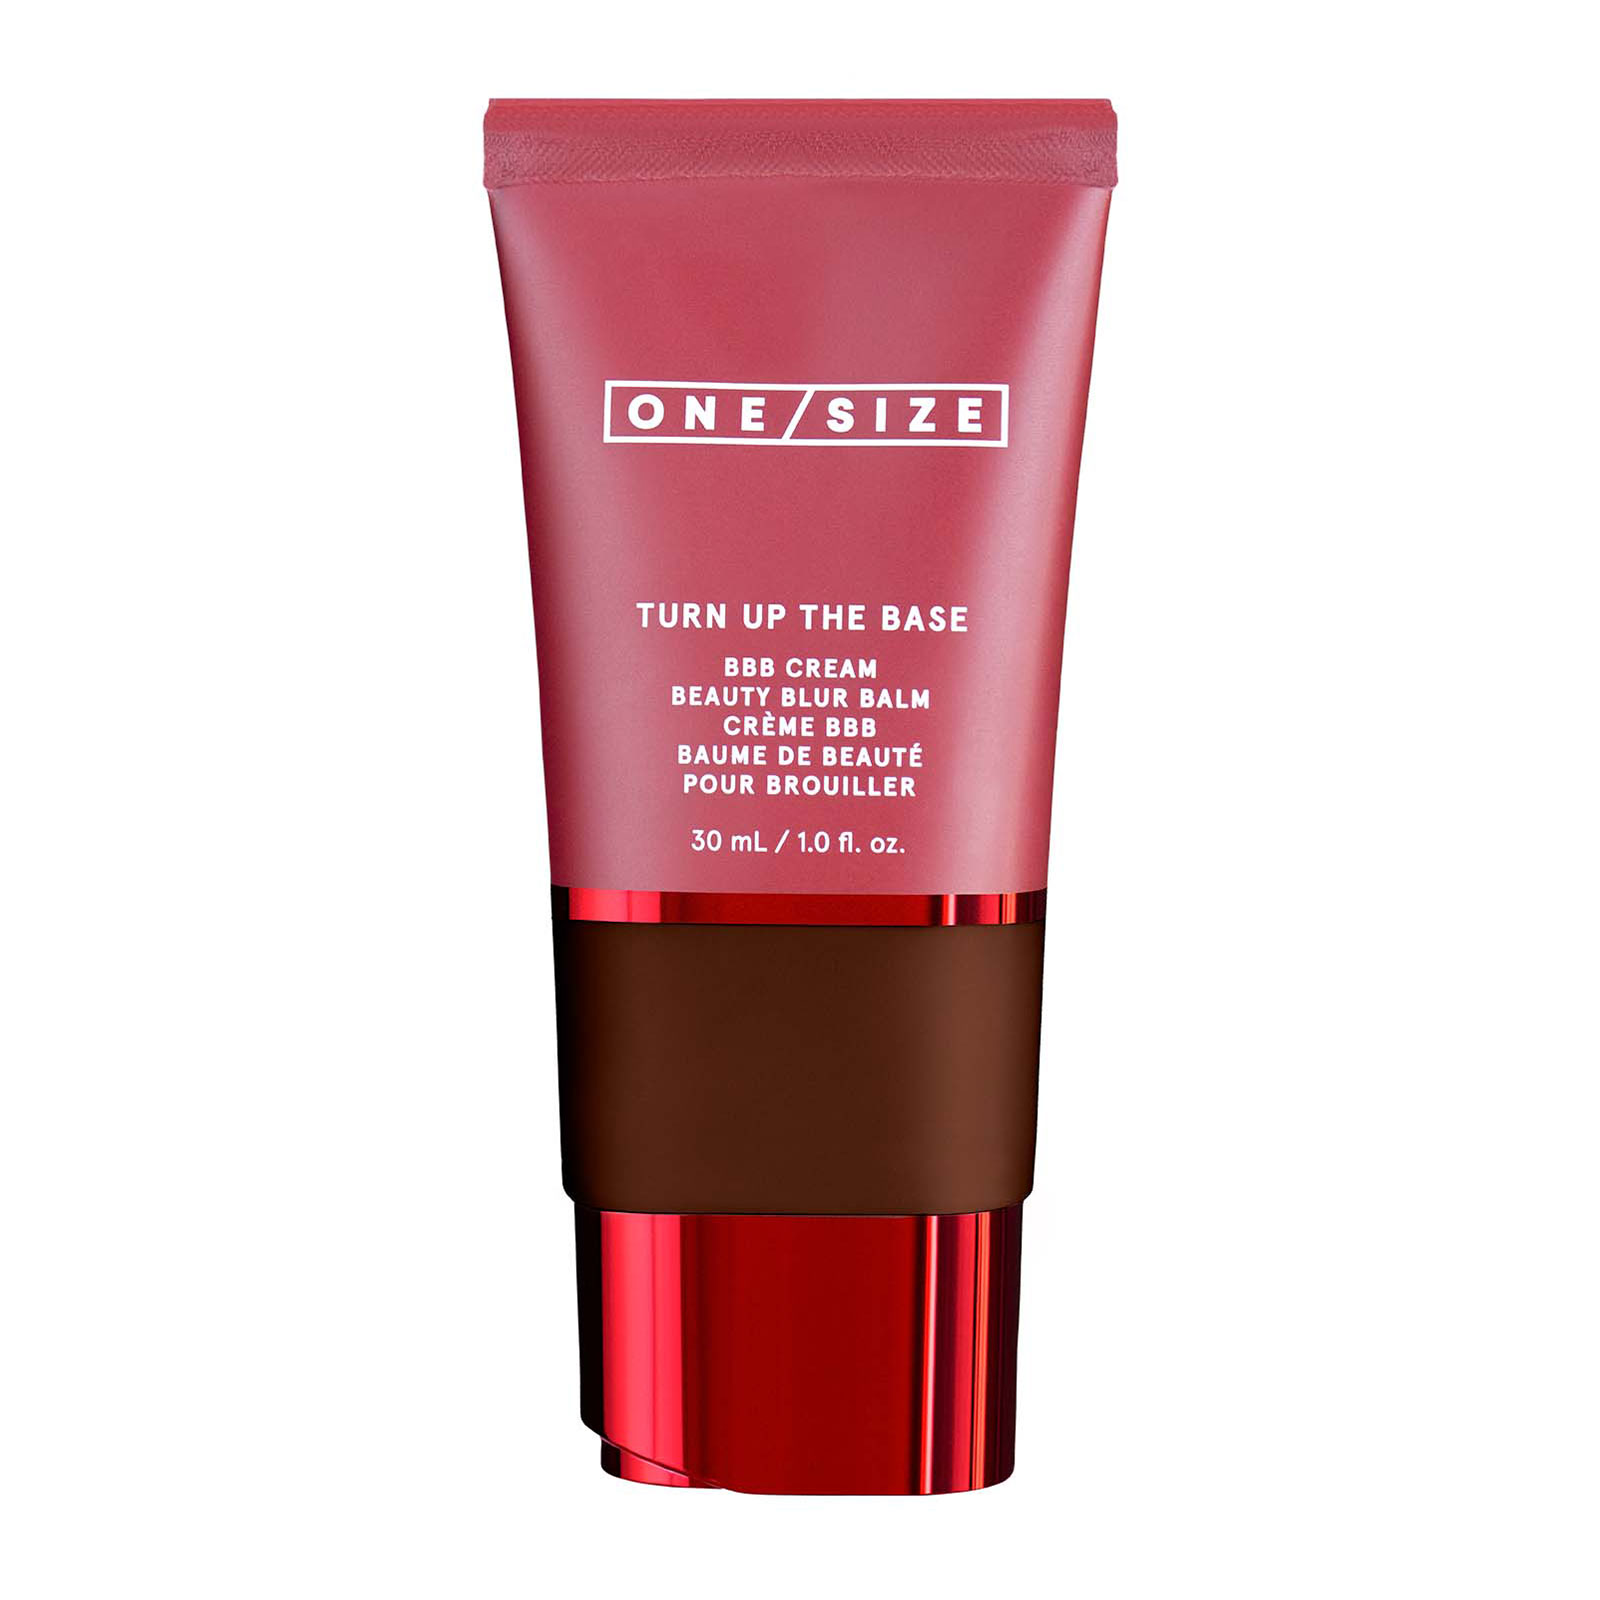 One/Size Turn Up The Base Blurring Foundation 30Ml Deep 2